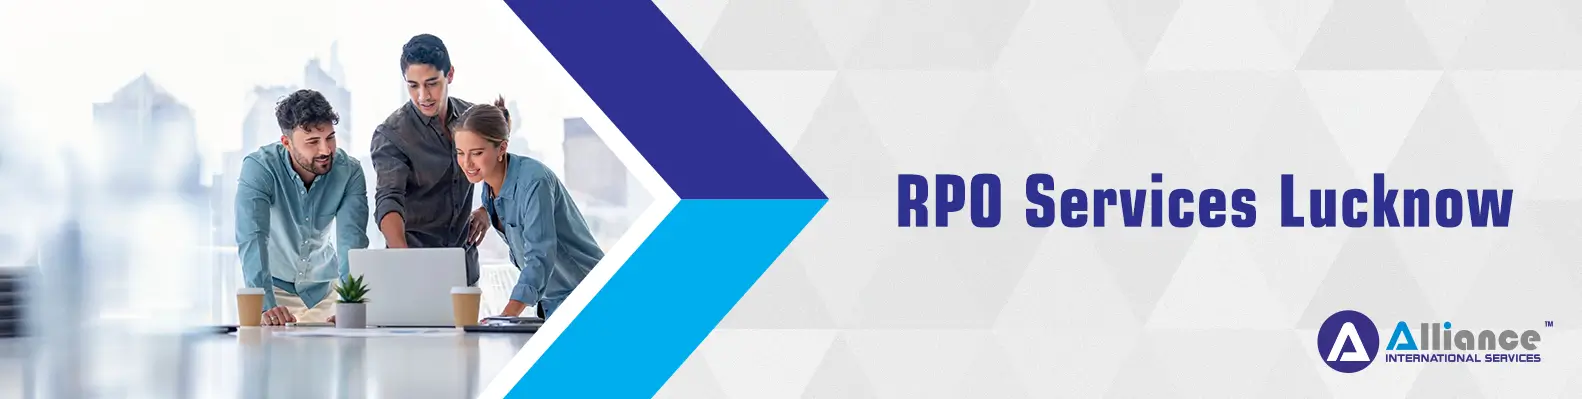 RPO Services Lucknow